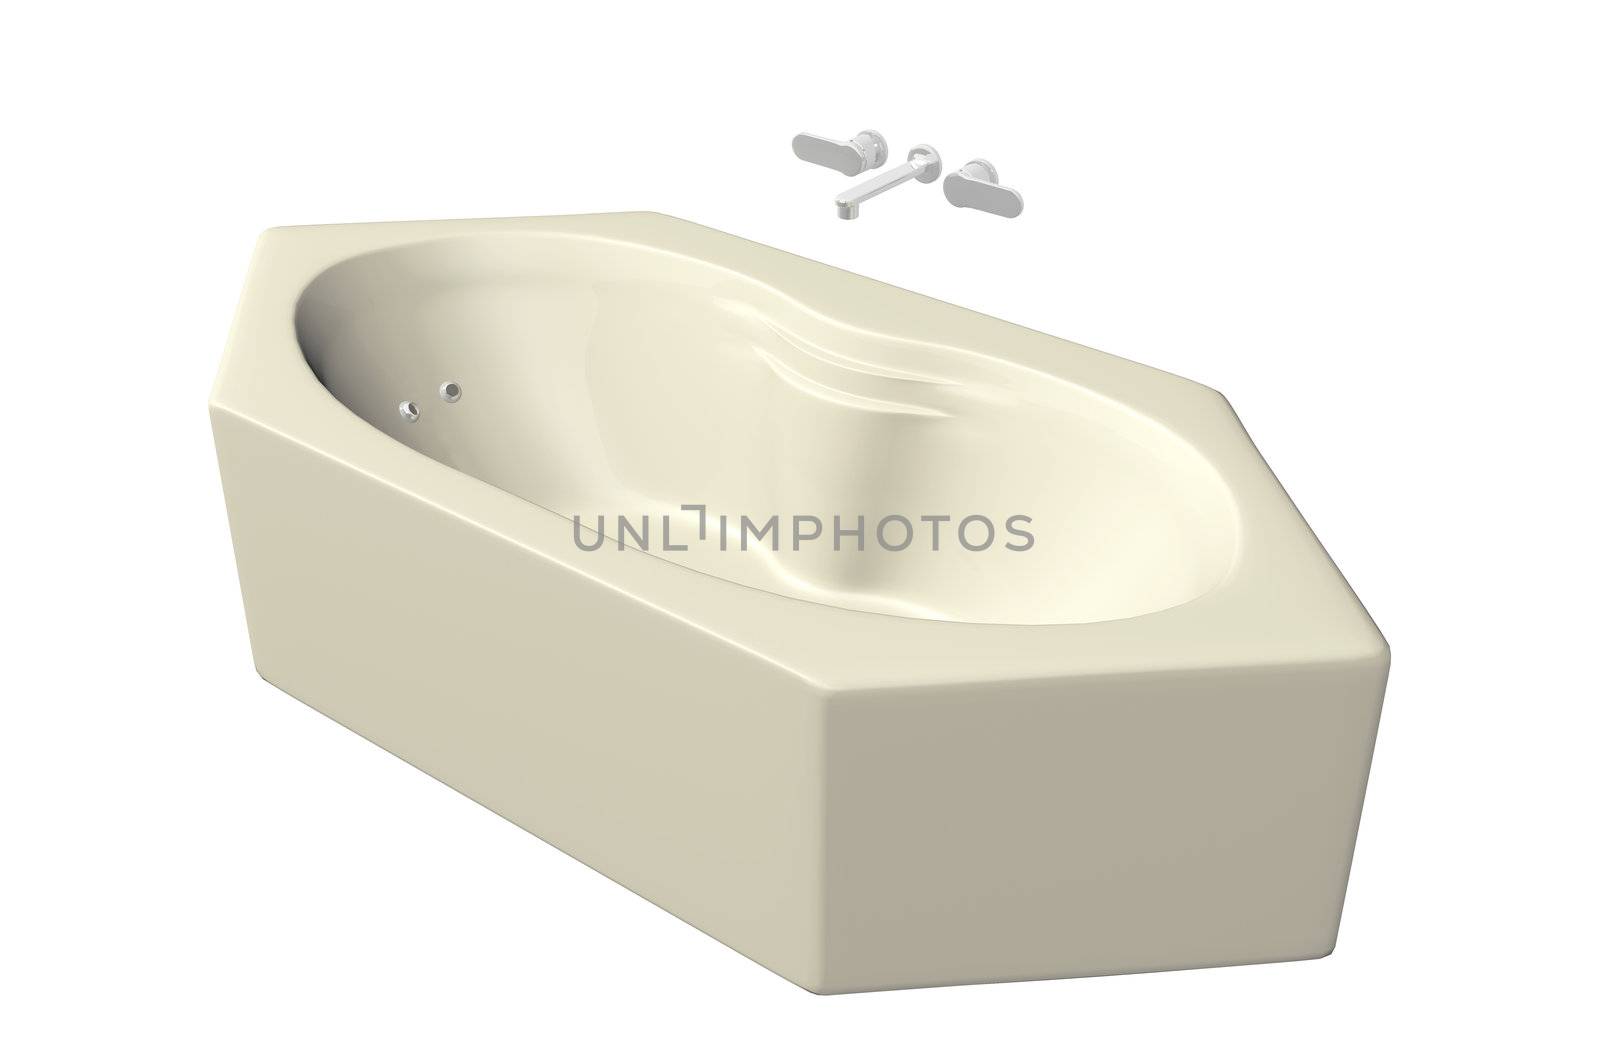 Cream colored hexagonal bathtub with stainless fixtures by Morphart